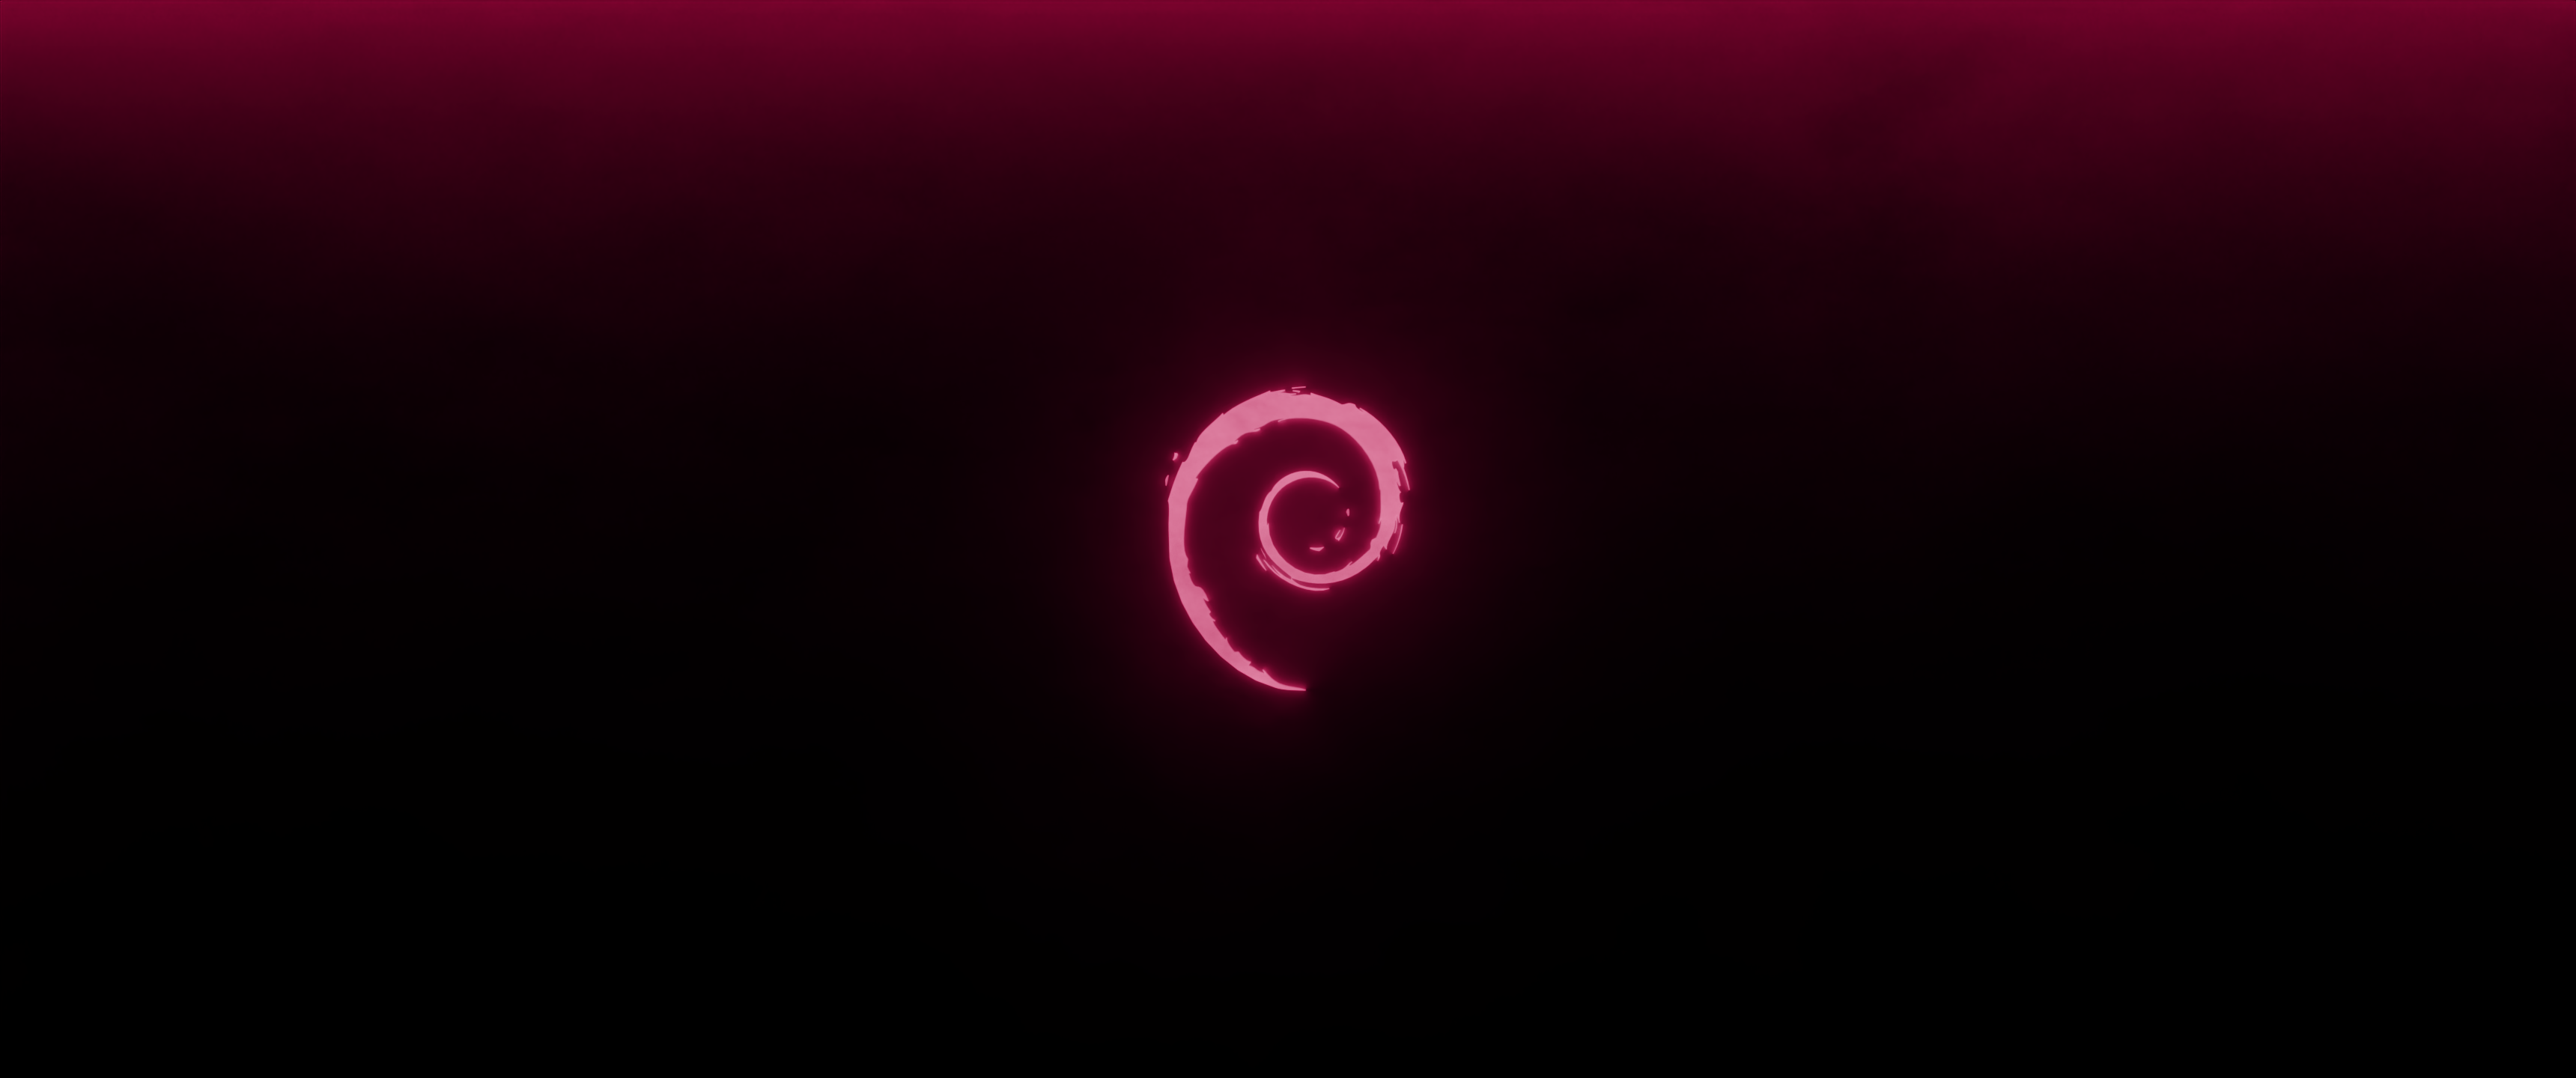 General 3440x1440 Linux operating system Debian bass clef